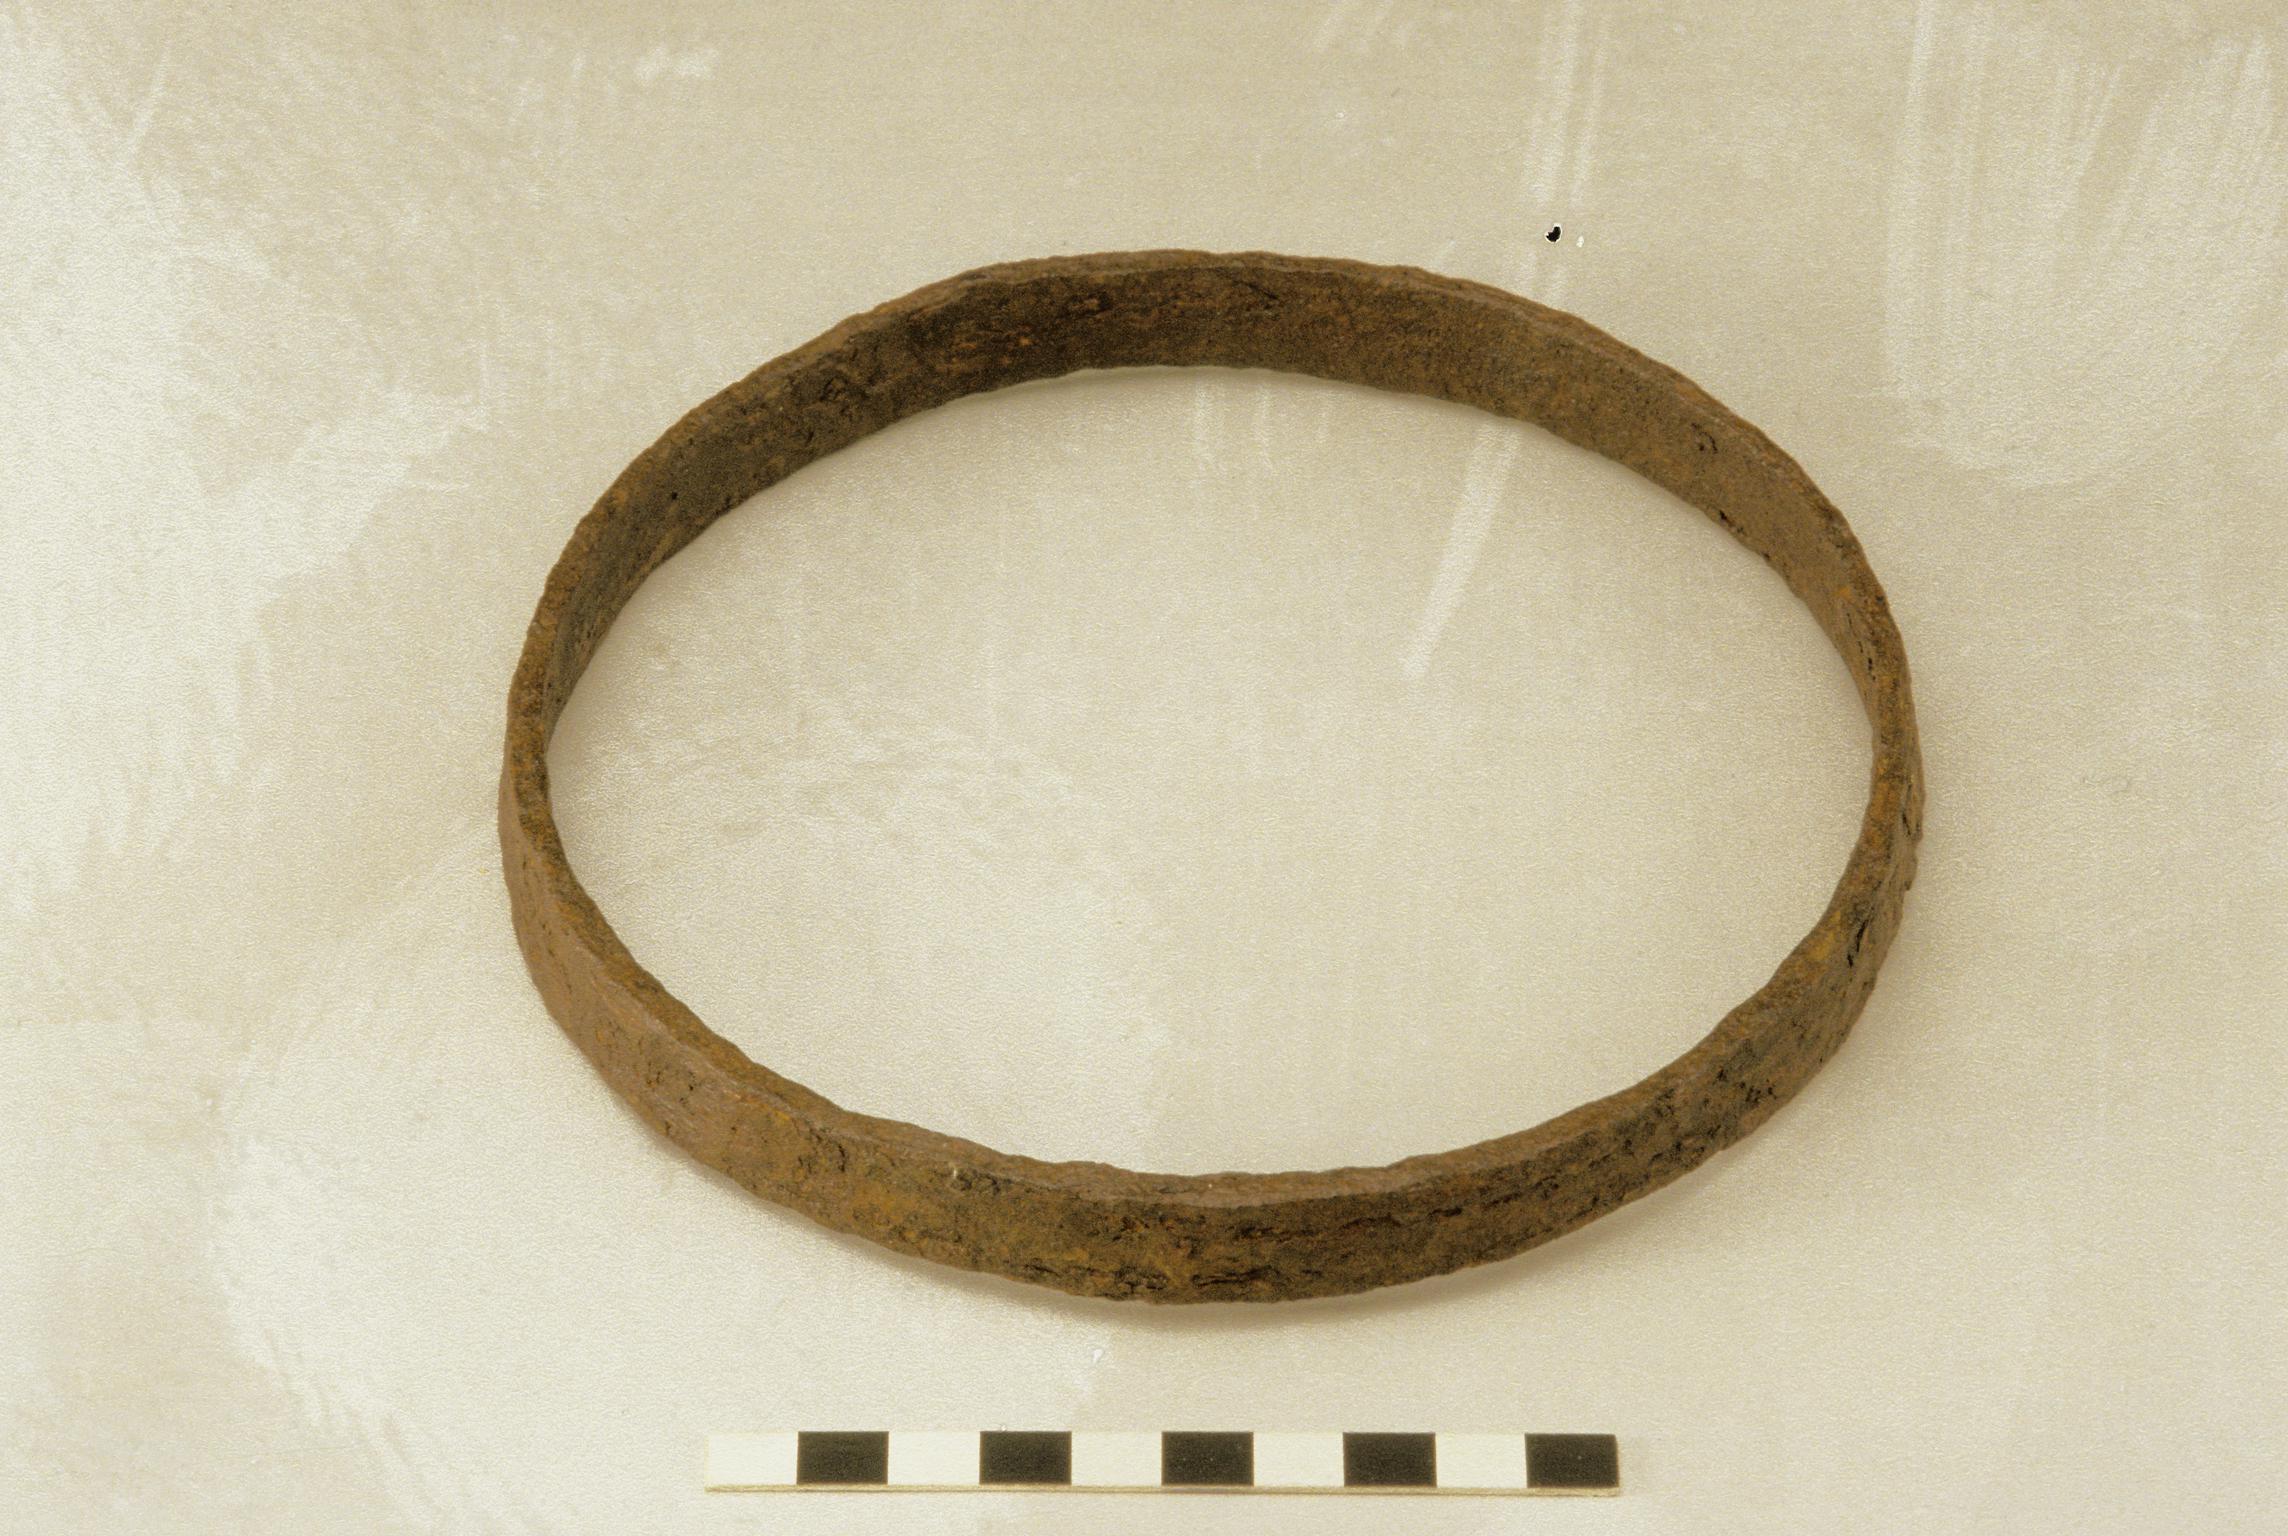 Late Iron Age iron nave hoop